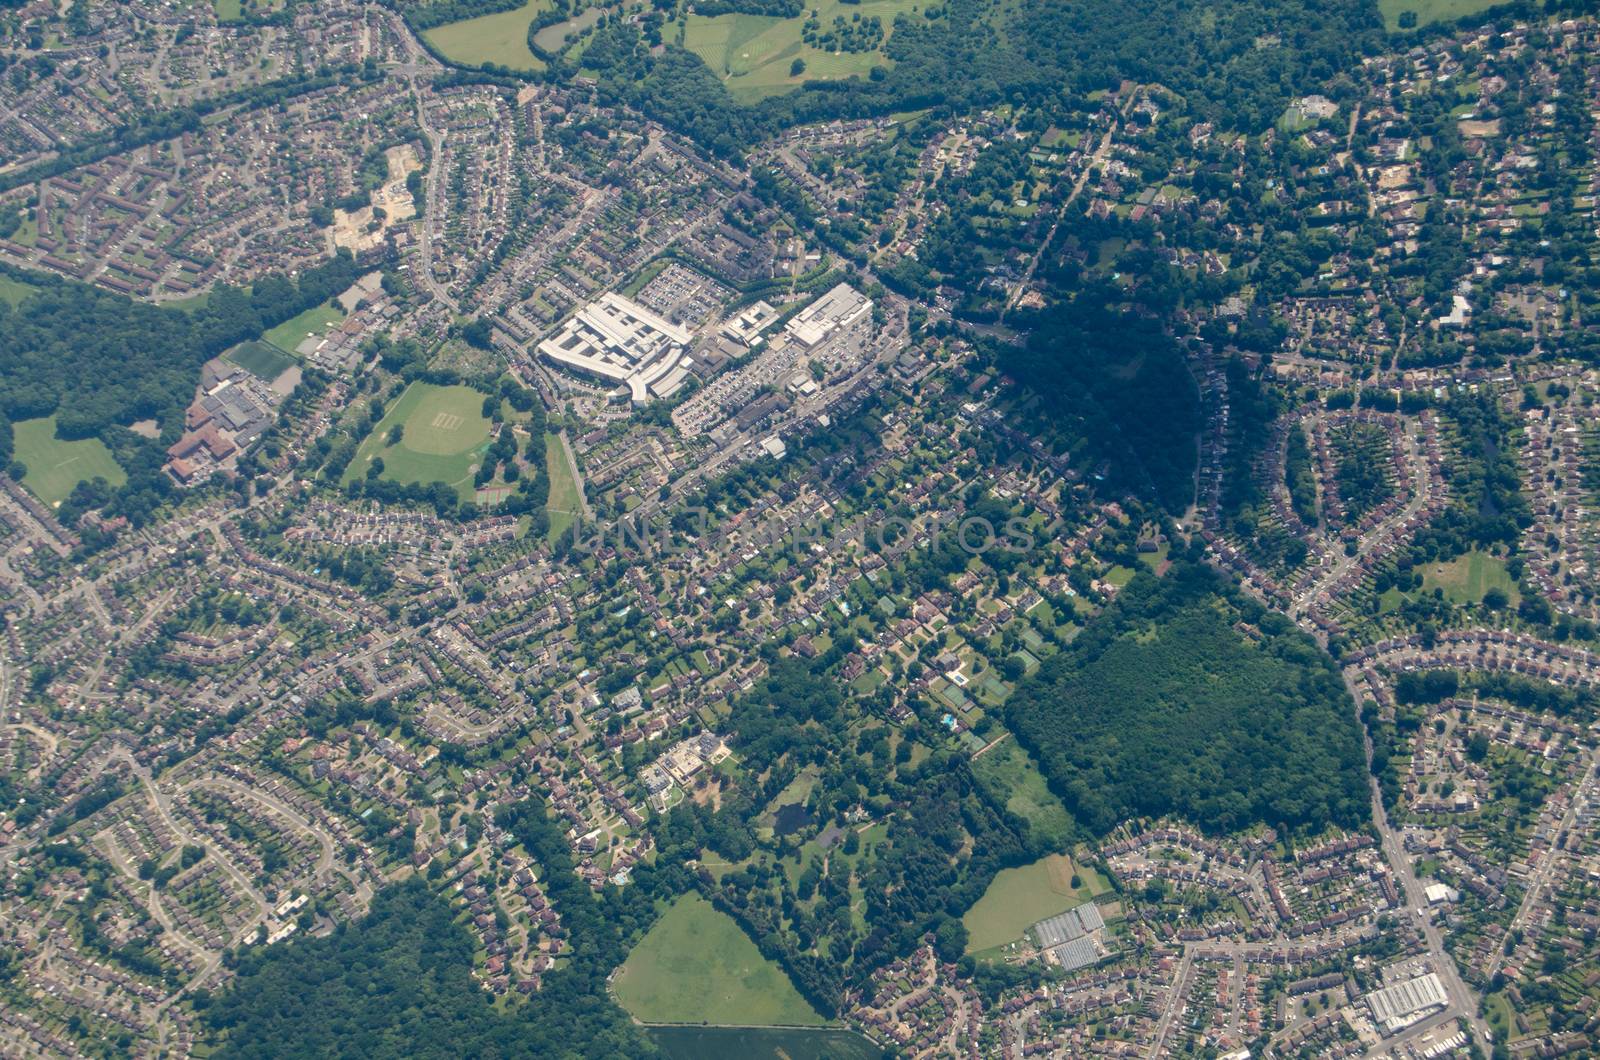 Aerial view of the Princess Royal University Hospital in the London Borough of Bromley.  An NHS hospital, it was originally called the Farnborough Infirmary and was most recently redeveloped in 2003.